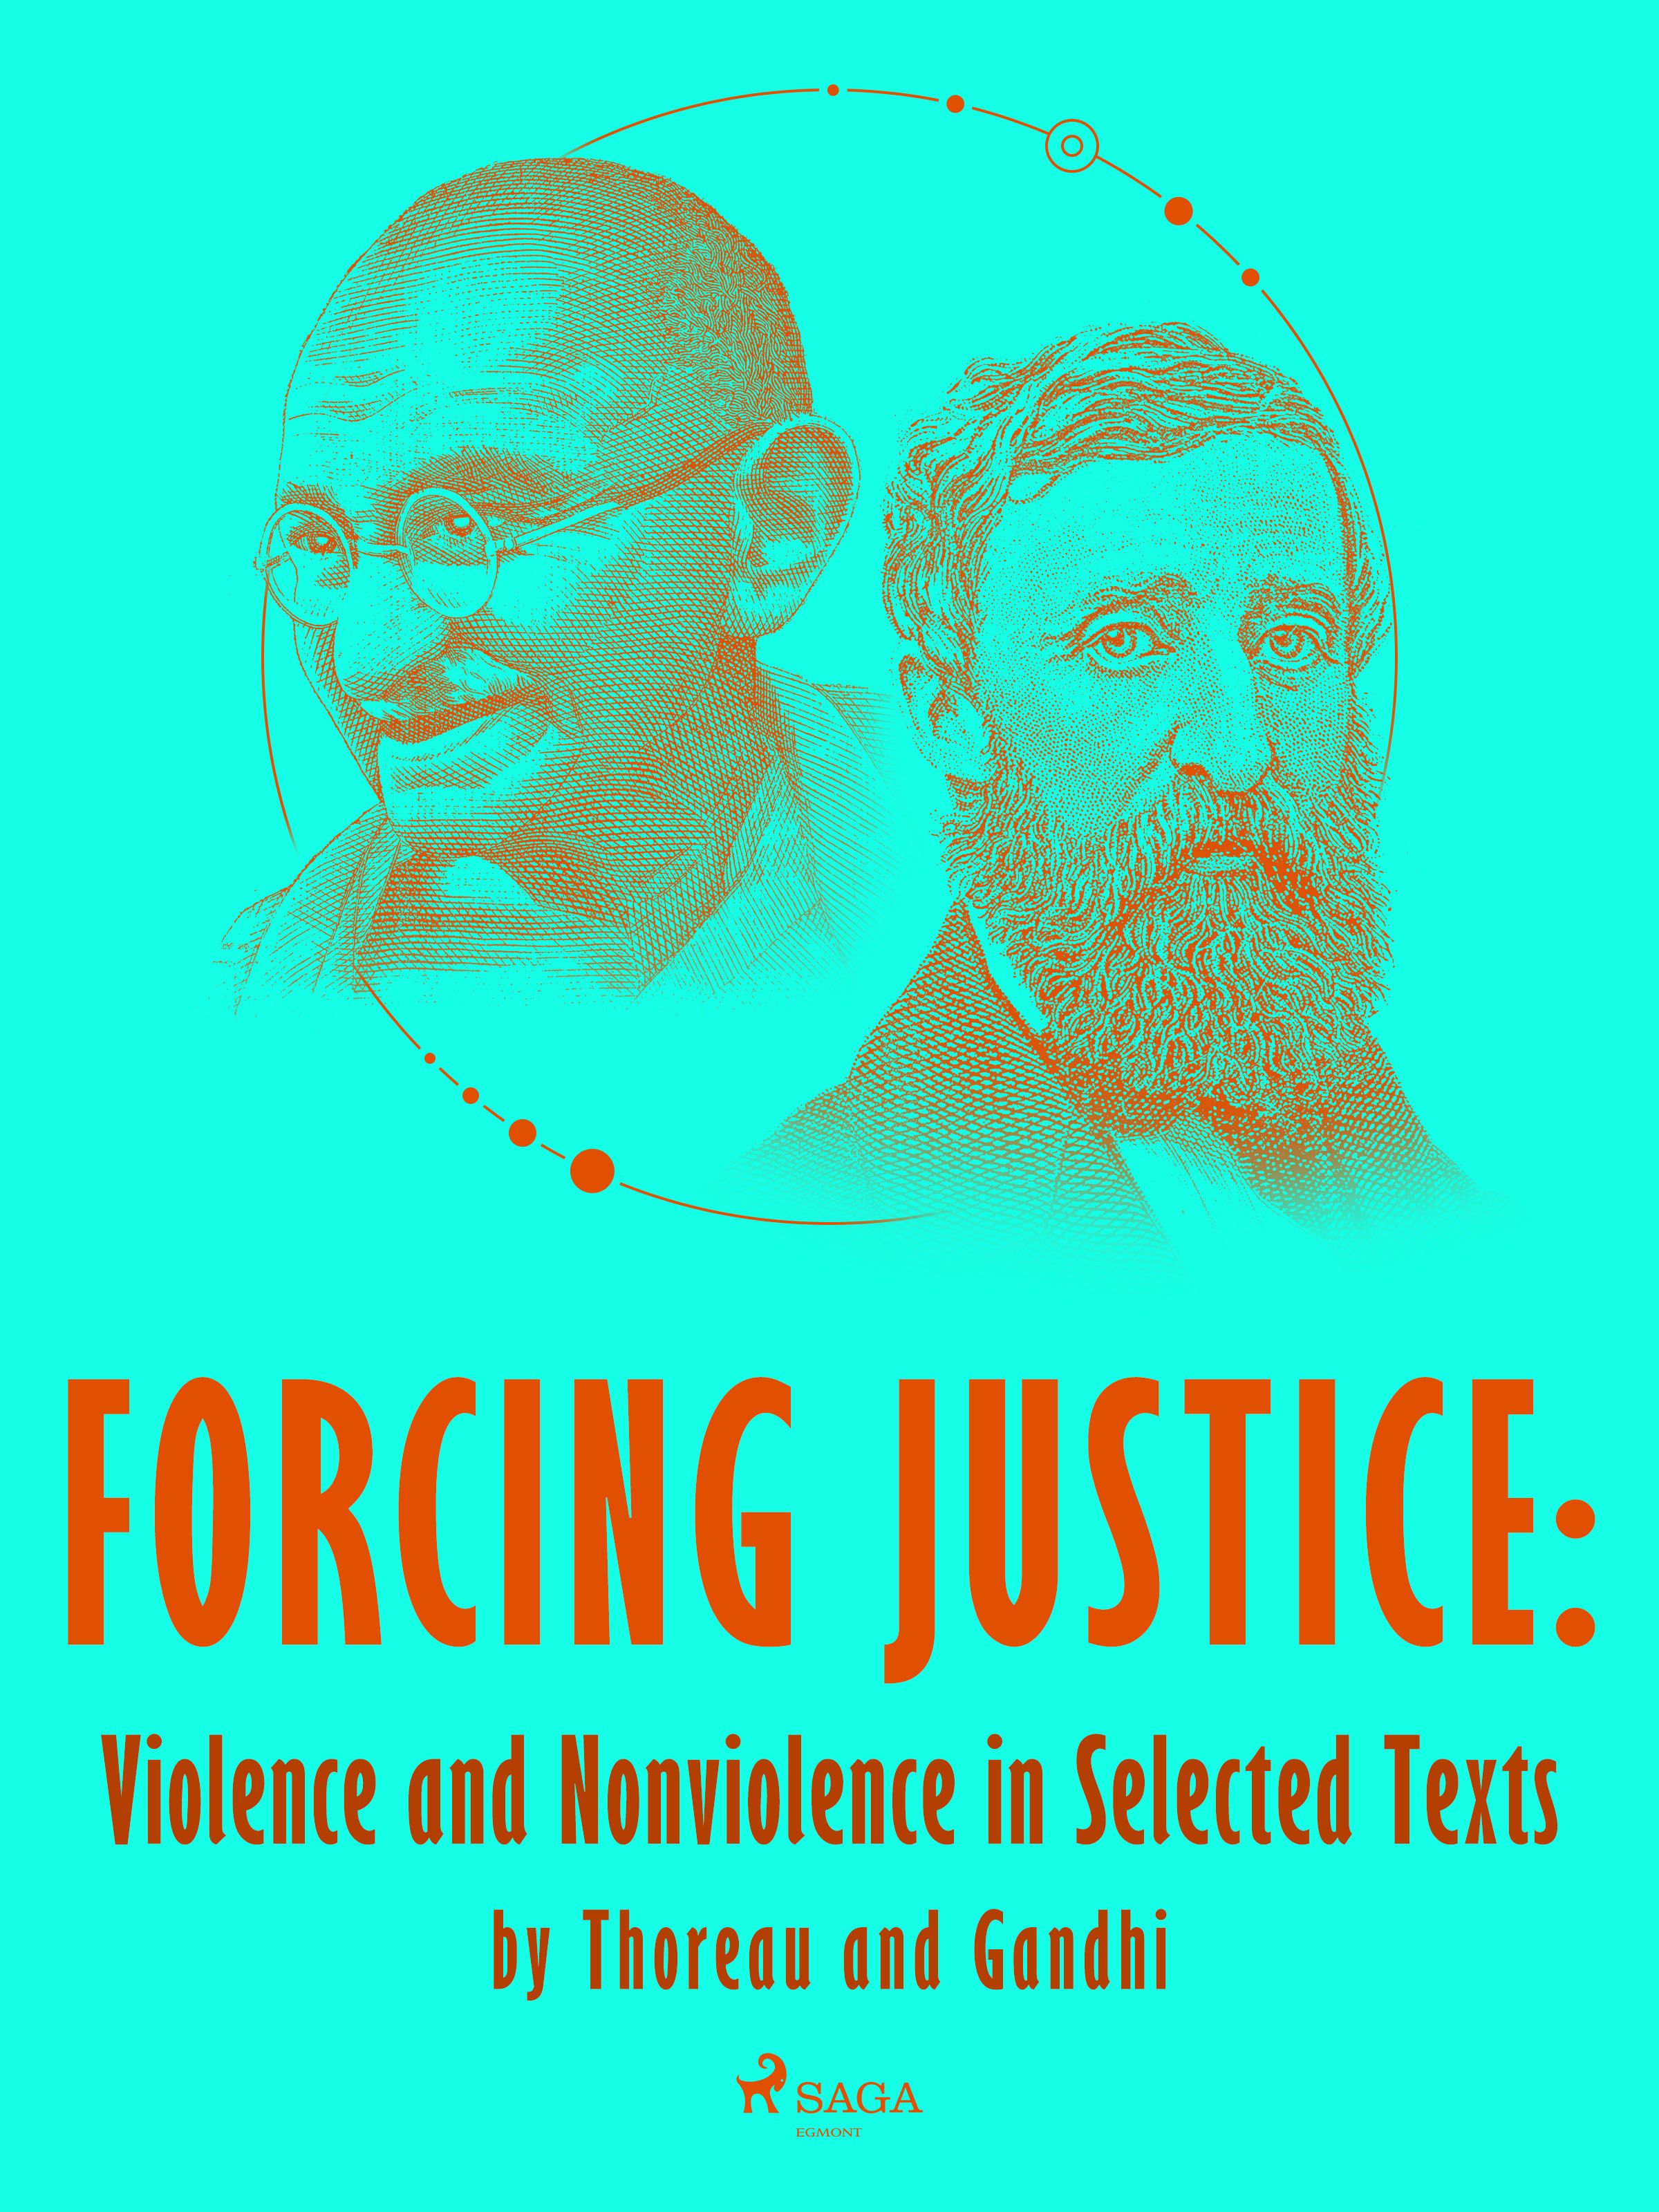 Forcing Justice: Violence and Nonviolence in Selected Texts by Thoreau and Gandhi, e-bok av Mahatma Gandhi, Henry David Thoreau